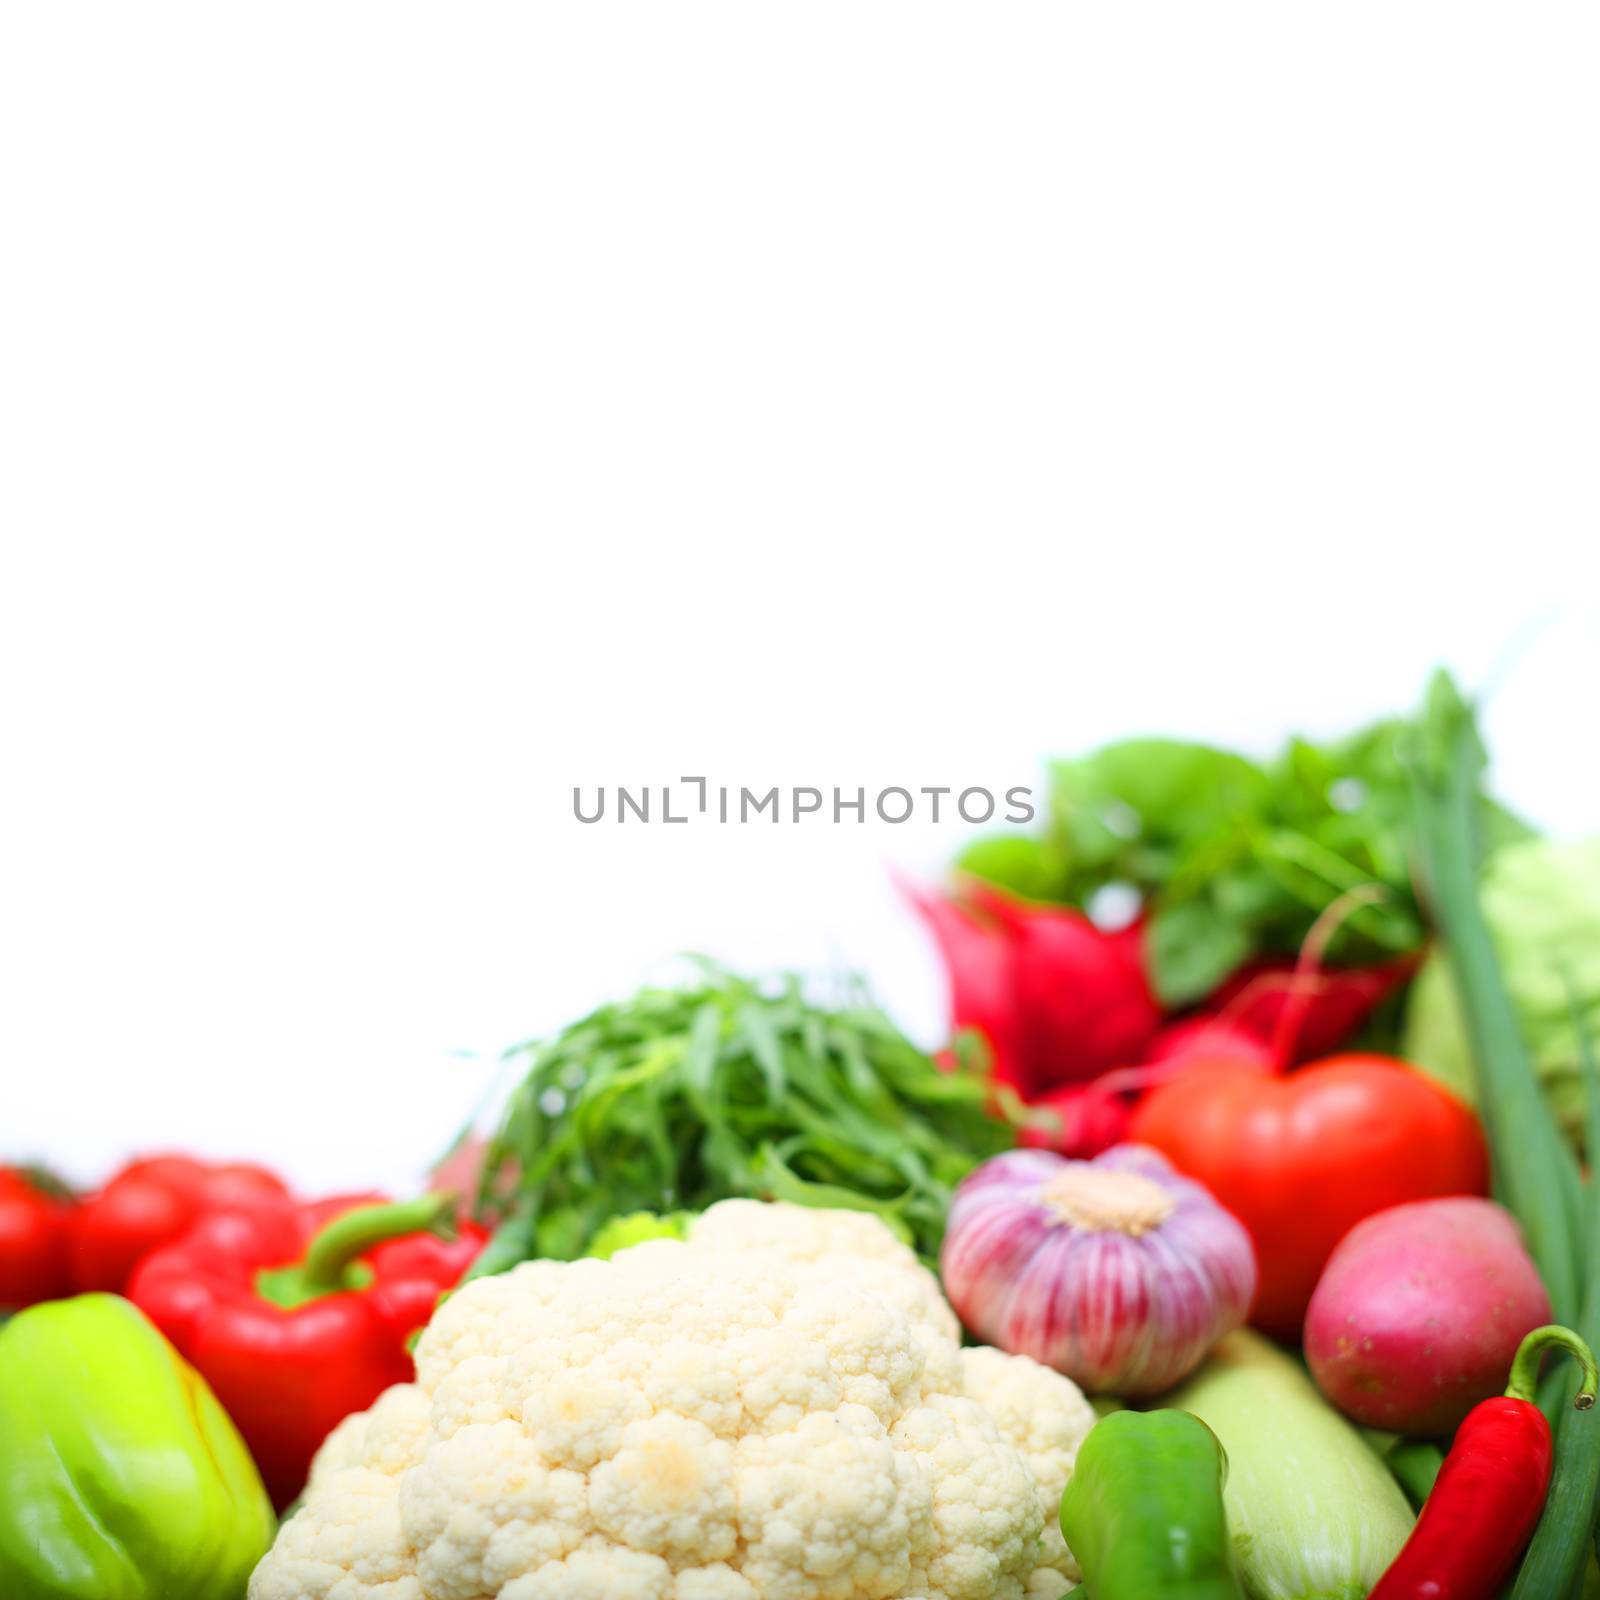 Pile of vegetables isolated on white background with copy space